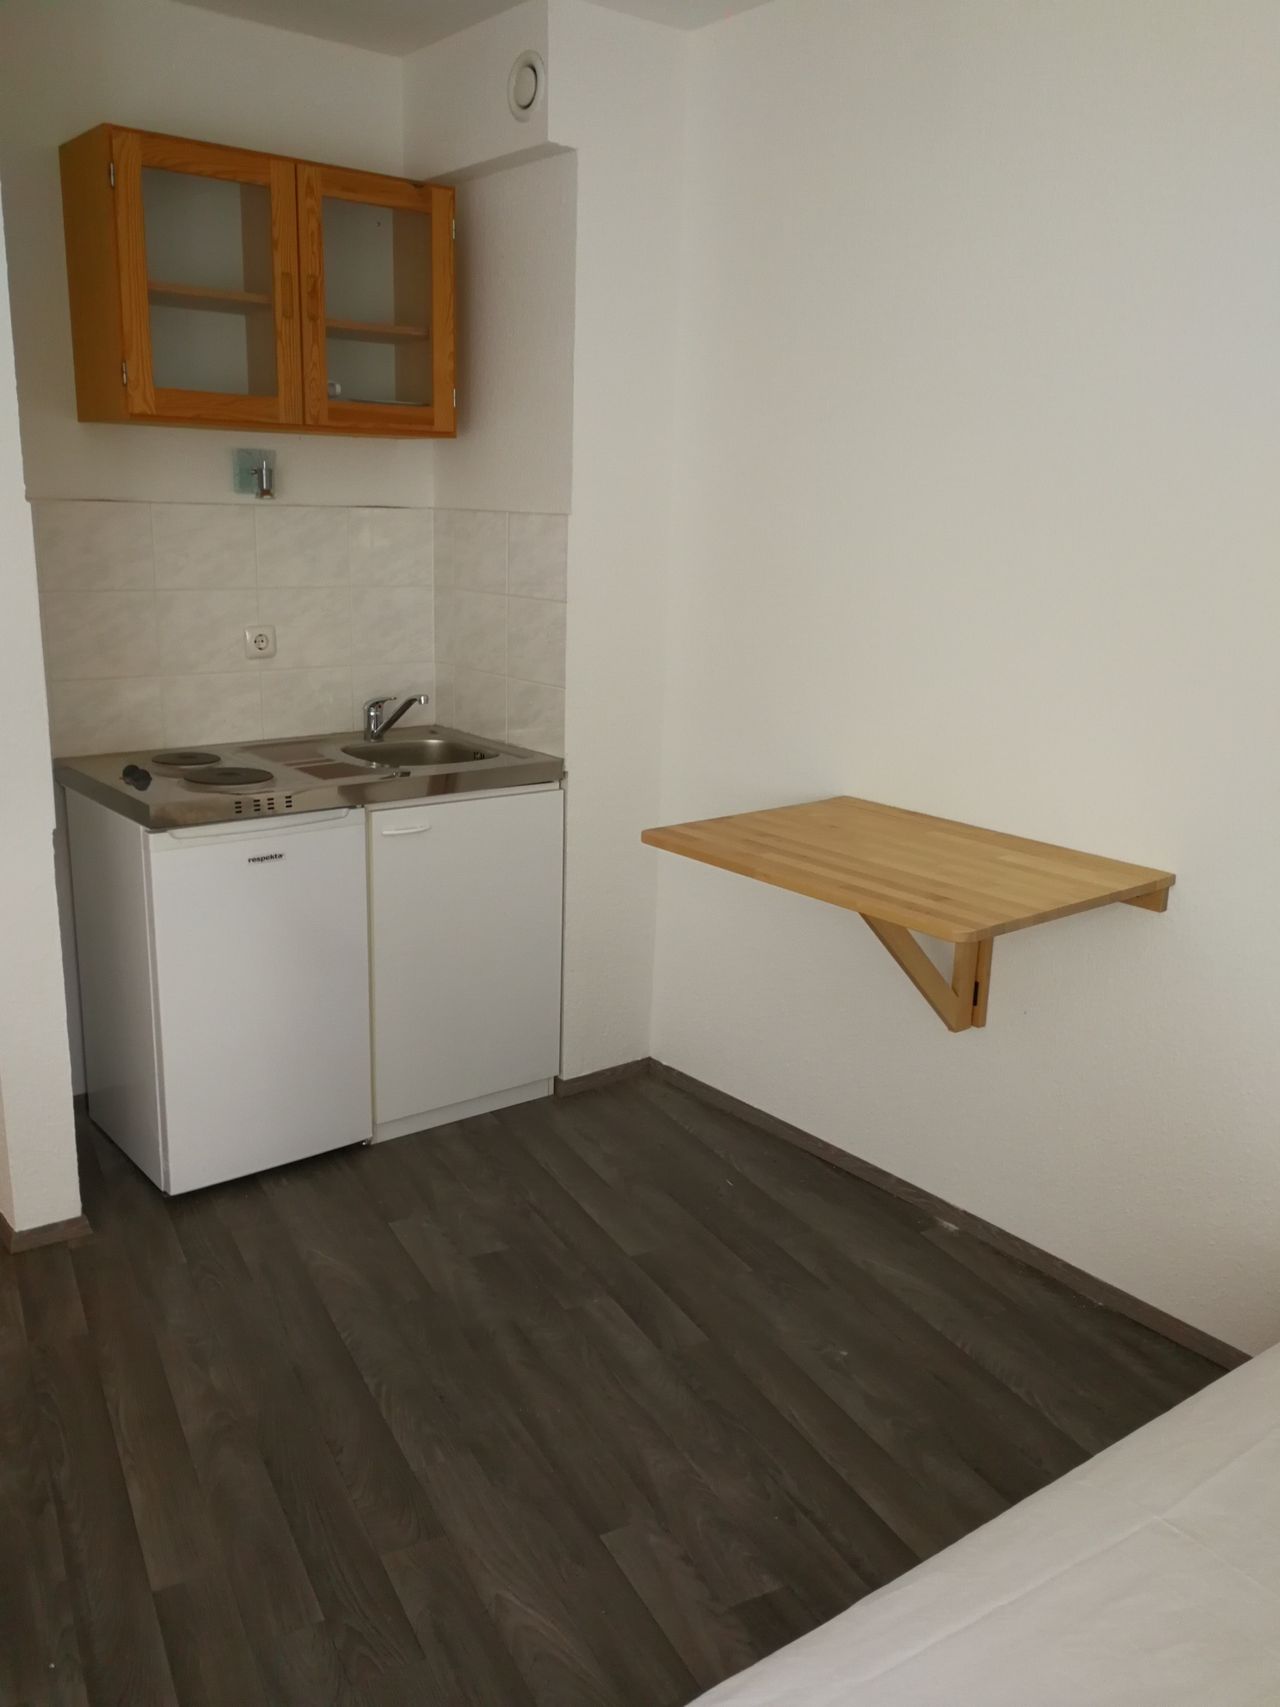 New apartment located in Mainz